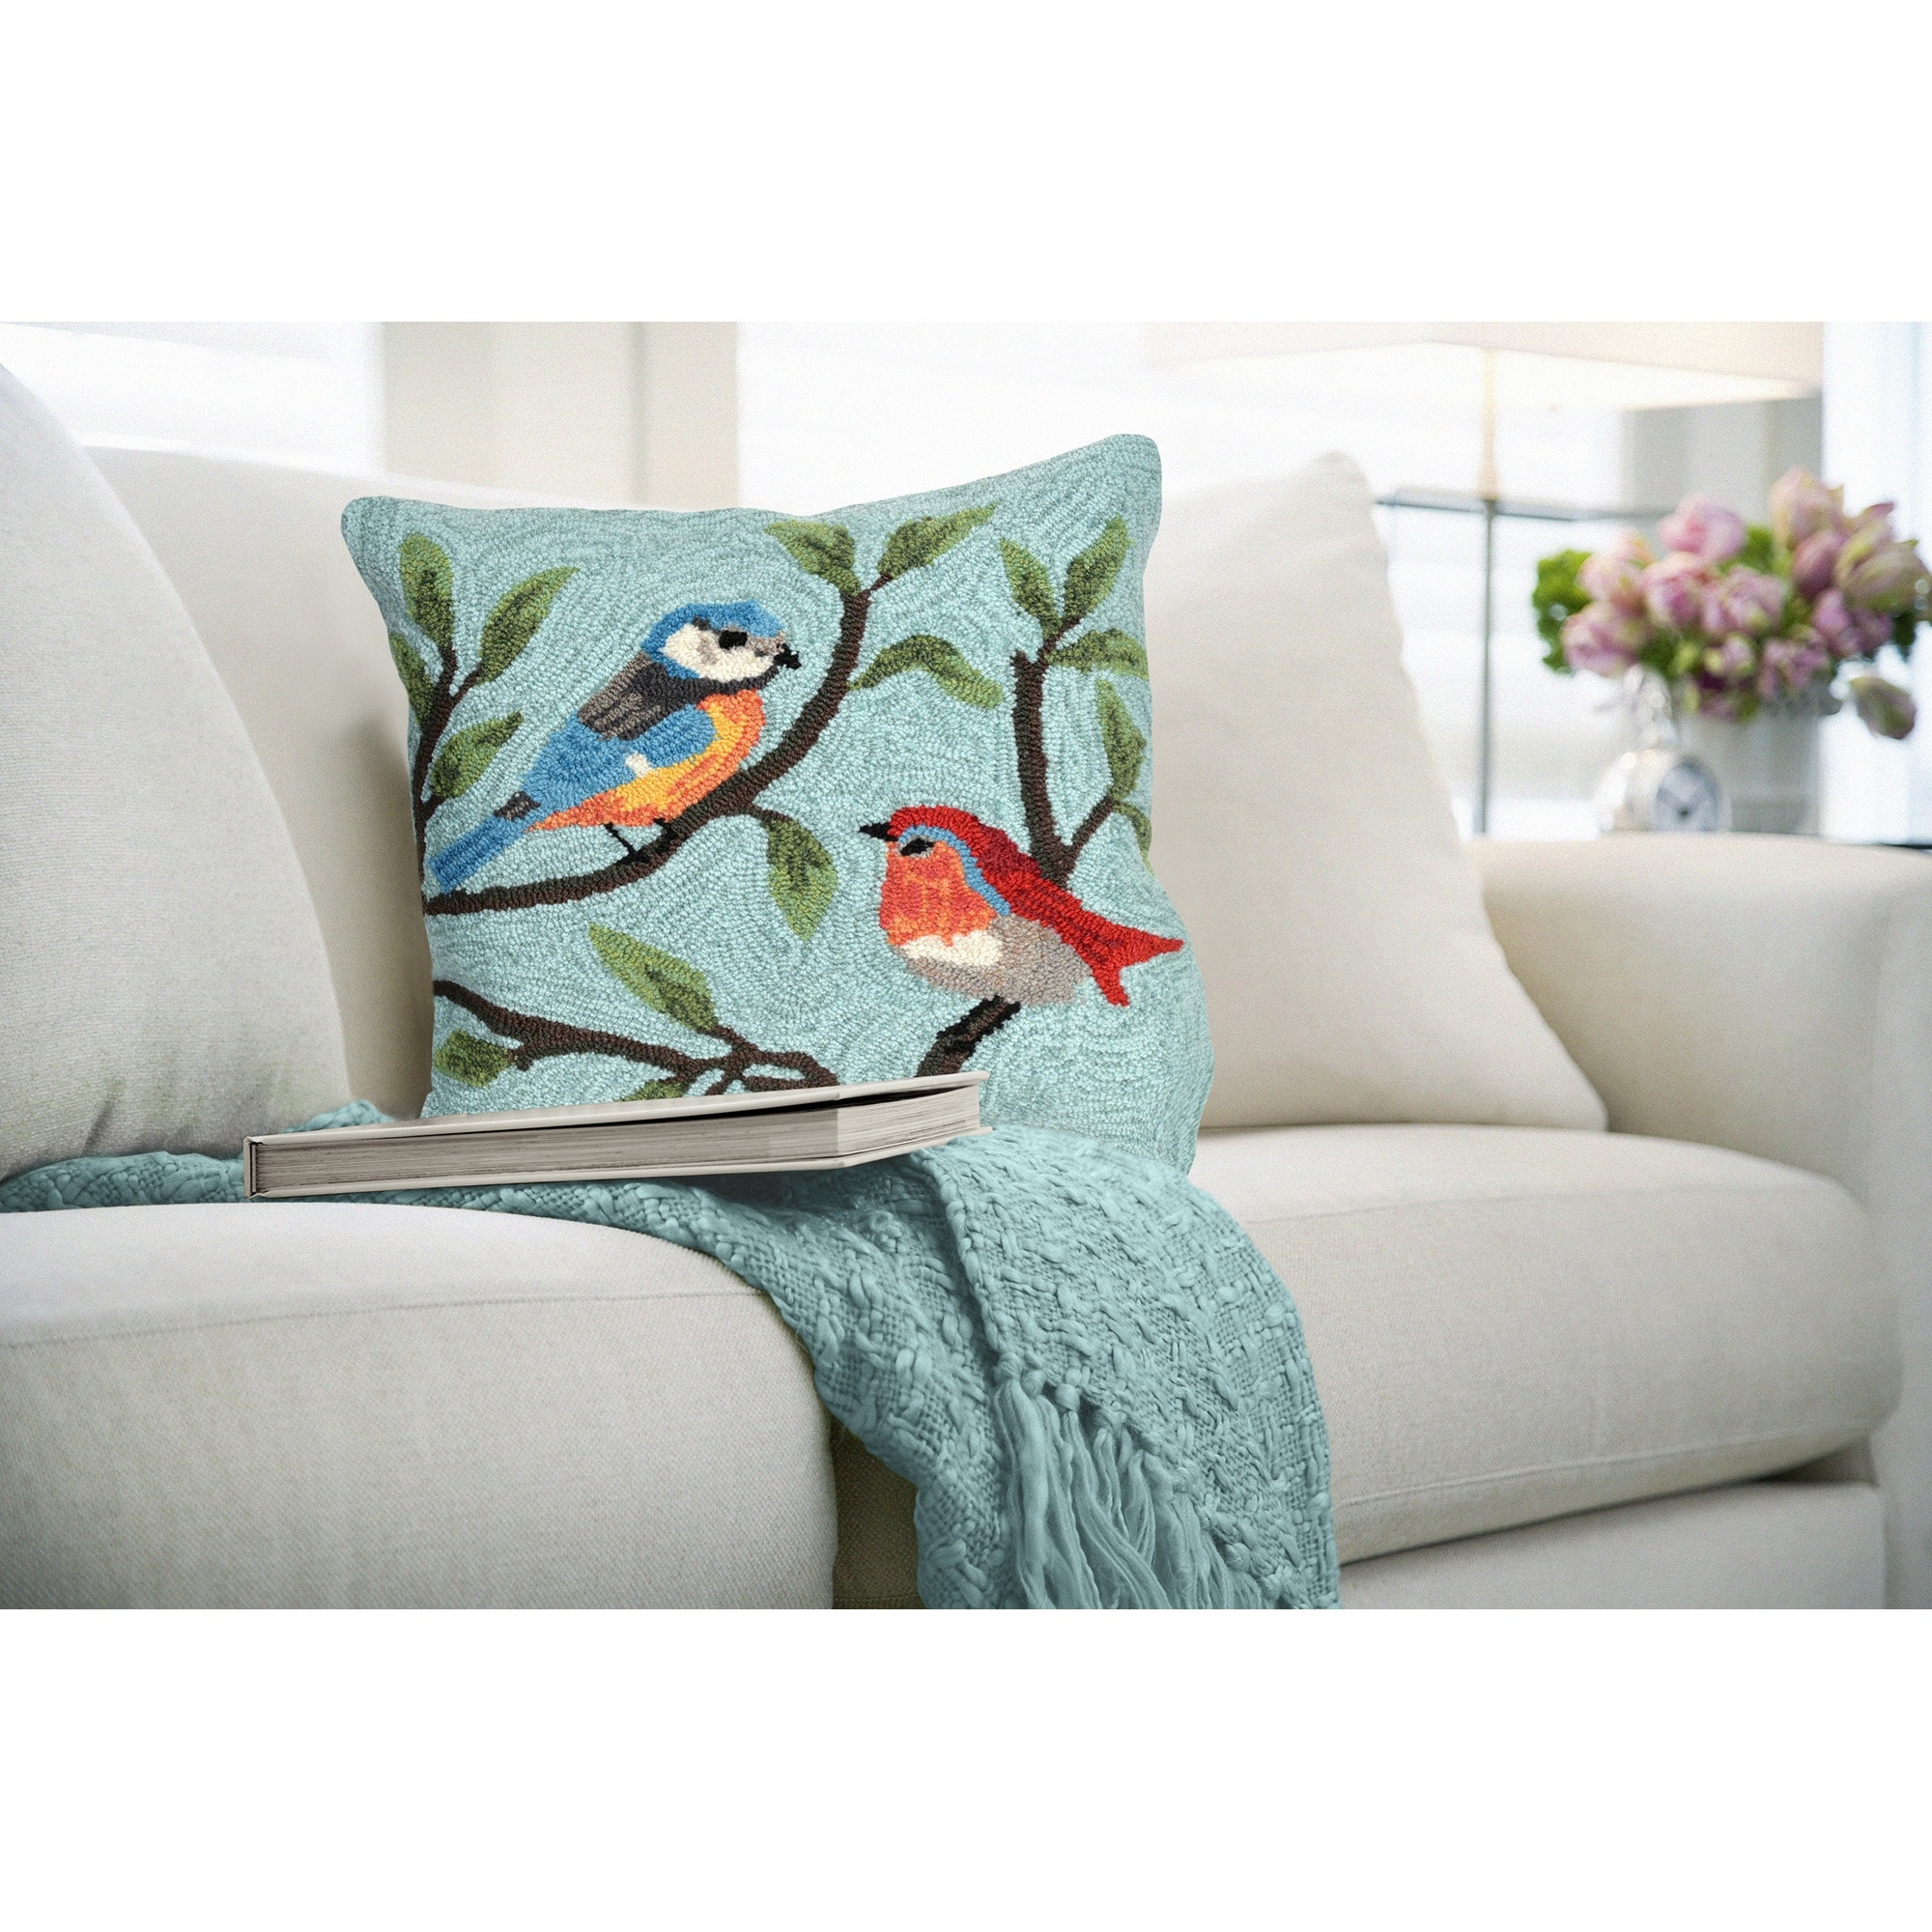 https://ak1.ostkcdn.com/images/products/is/images/direct/39cc4b837c98f04ea9e5c804d7801fe9a4d773cf/Liora-Manne-Frontporch-Birds-On-Branches-Indoor-Outdoor-Pillow-Aqua-18%22-Square.jpg